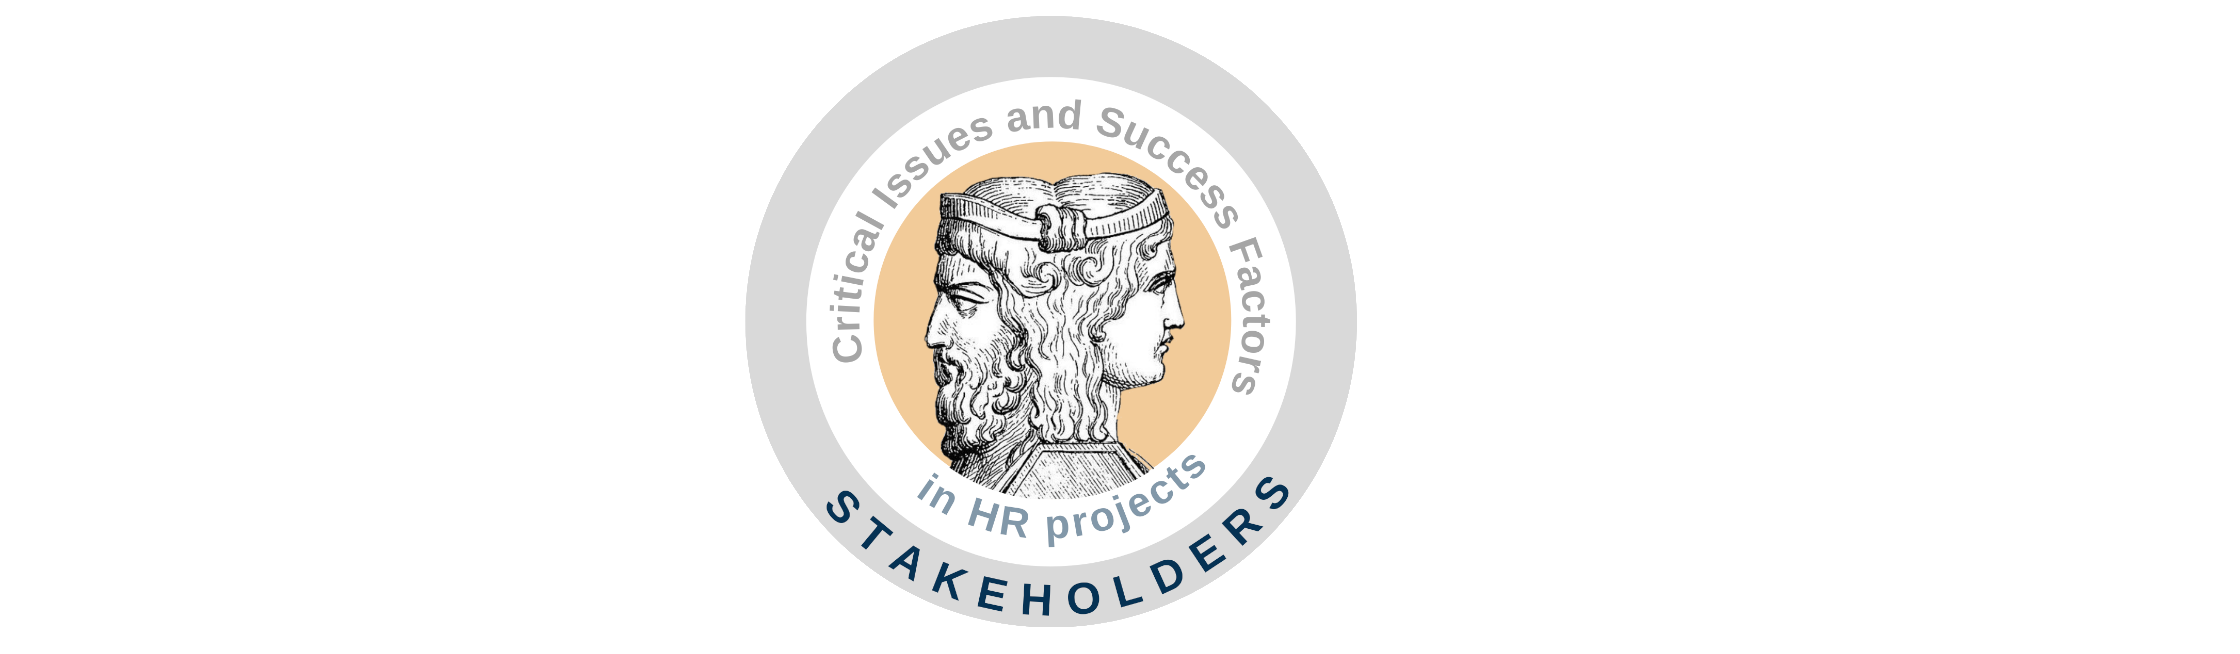 Critical Issues and Success Factors in HR projects: Stakeholders